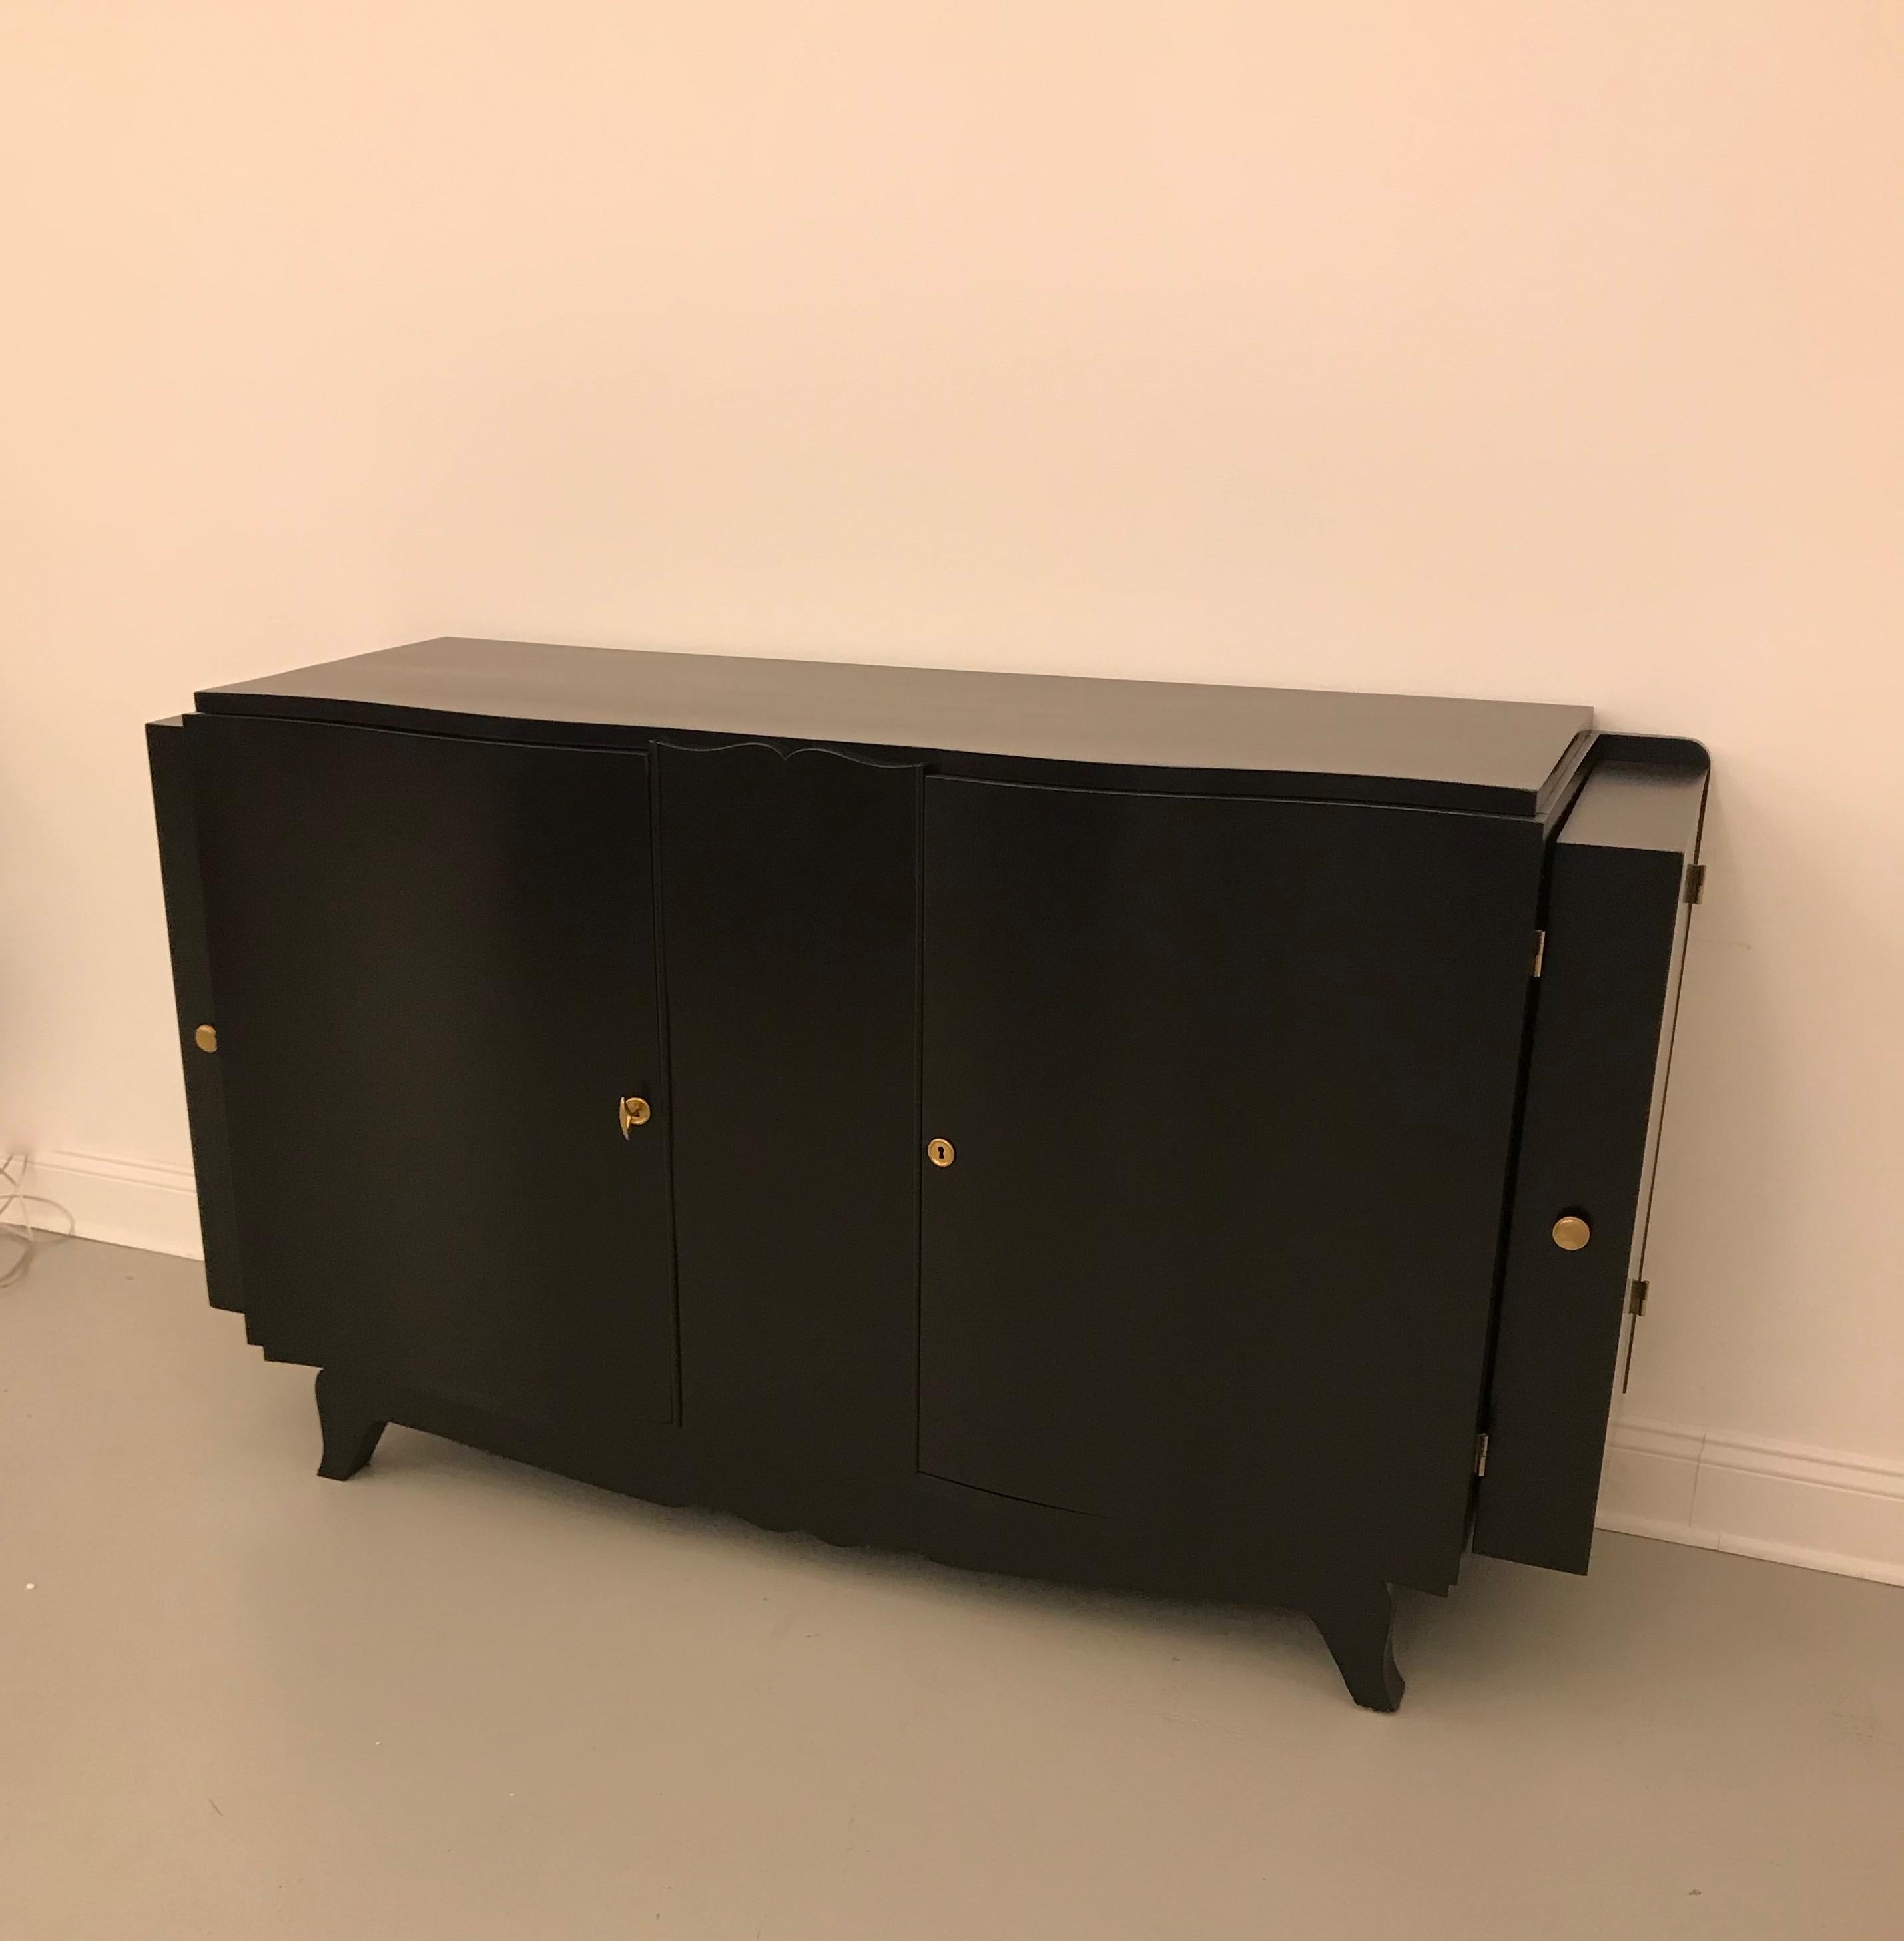 Stunning French Art Deco black lacquered sideboard or buffet with dry bar. Two hidden secret cabinets on the end of the buffet open to reveal a dry bar.
 